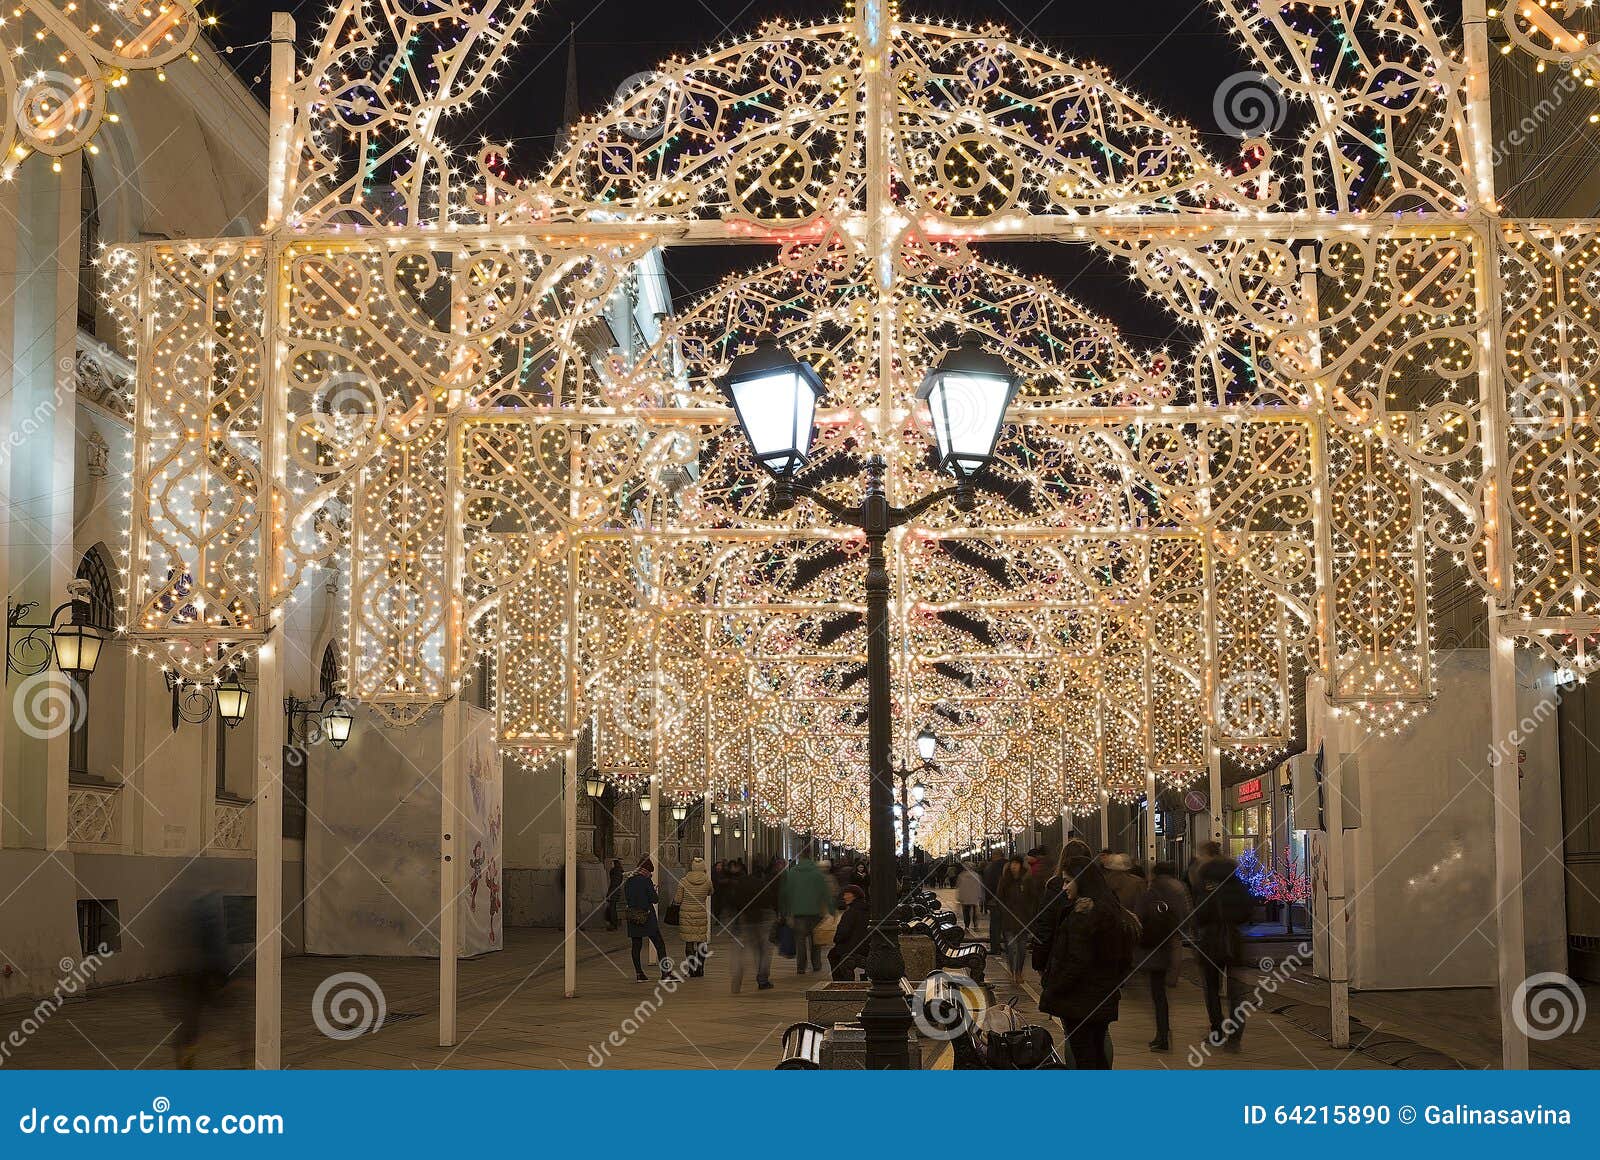 Christmas Decorations on the Streets of Moscow. Editorial Image - Image ...